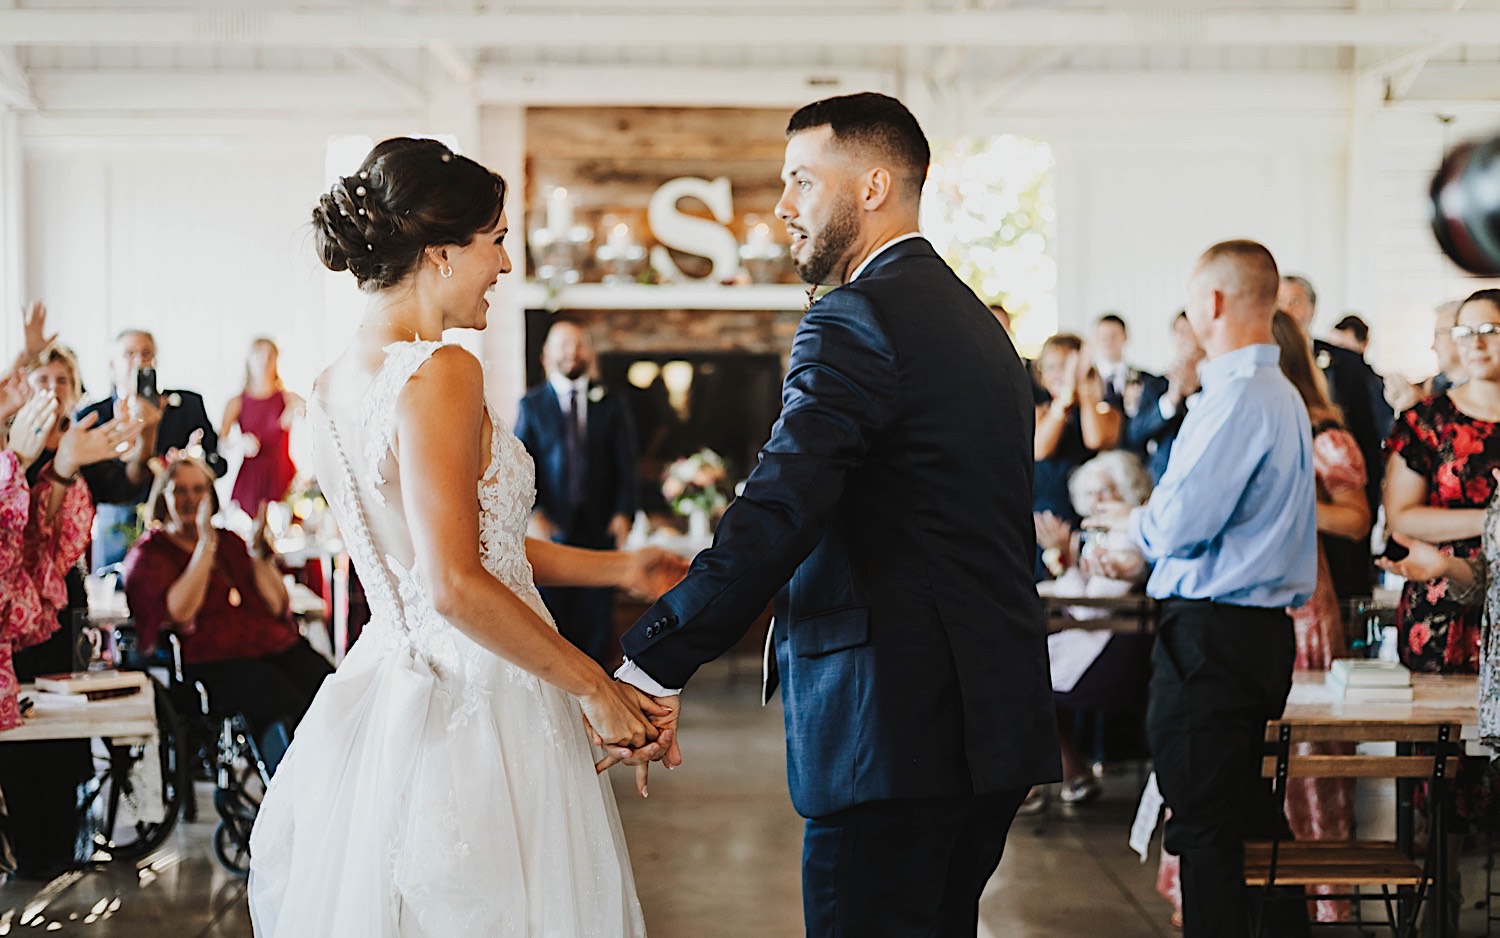 A bride and groom hold hands and share their first dance as guests watch during their indoor wedding reception at their venue Legacy Hill Farms in Minnesota